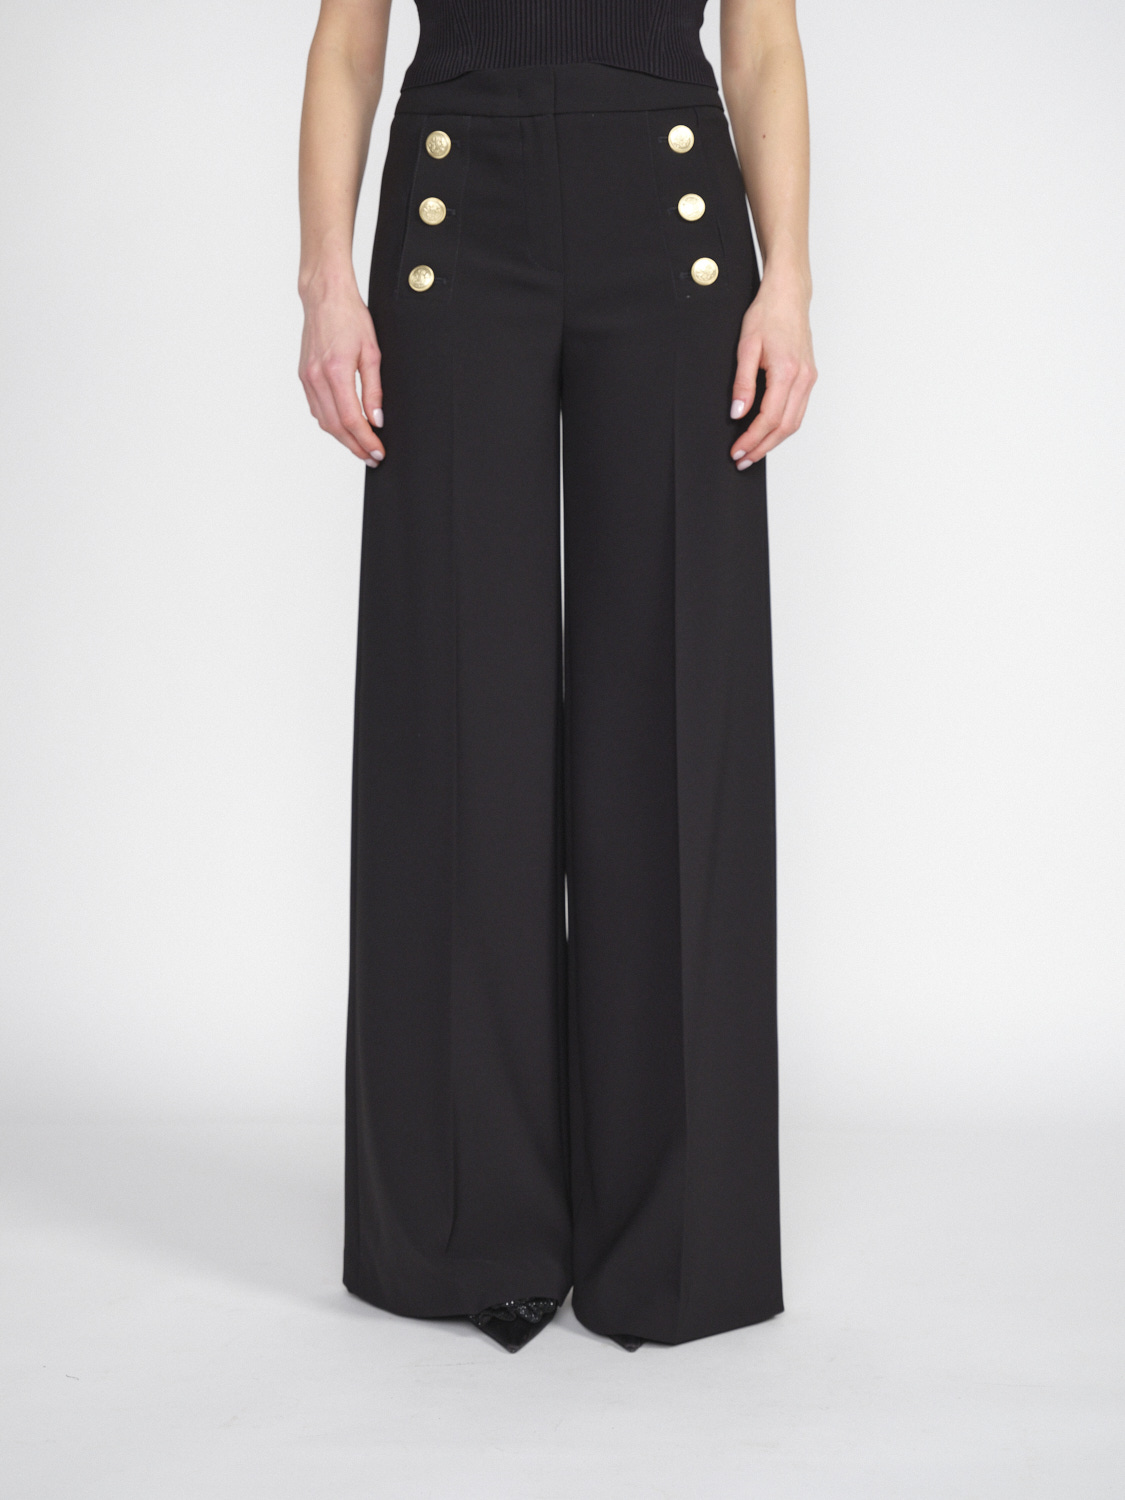 Bridget - Stretchy trousers with gold button details 